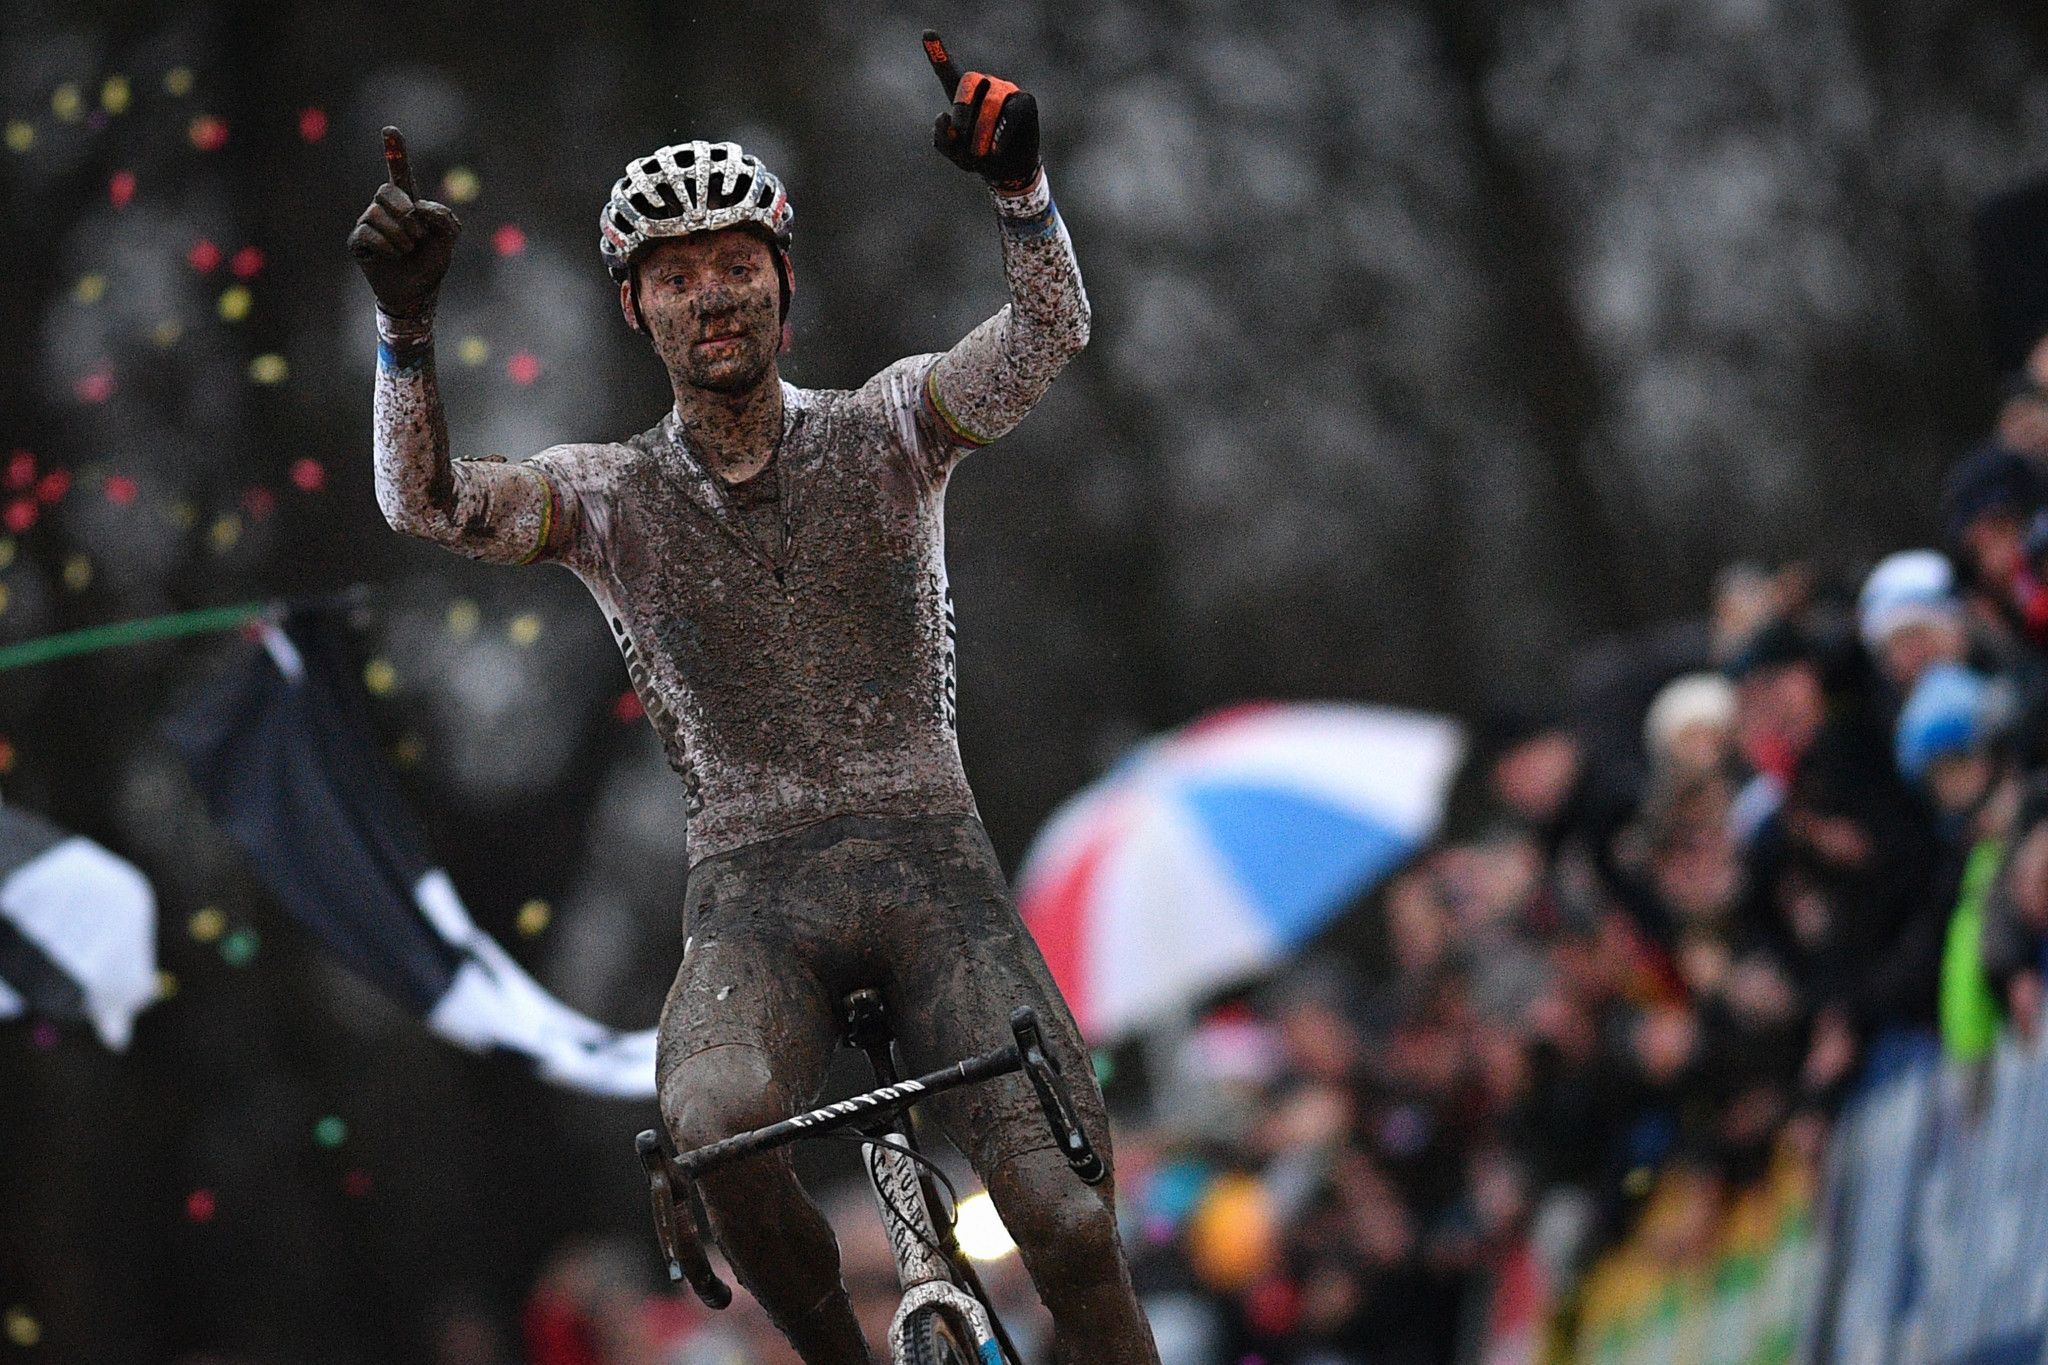 Van der Poel claims fourth consecutive UCI Cyclo-Cross World Cup victory of season after winning in Numar 